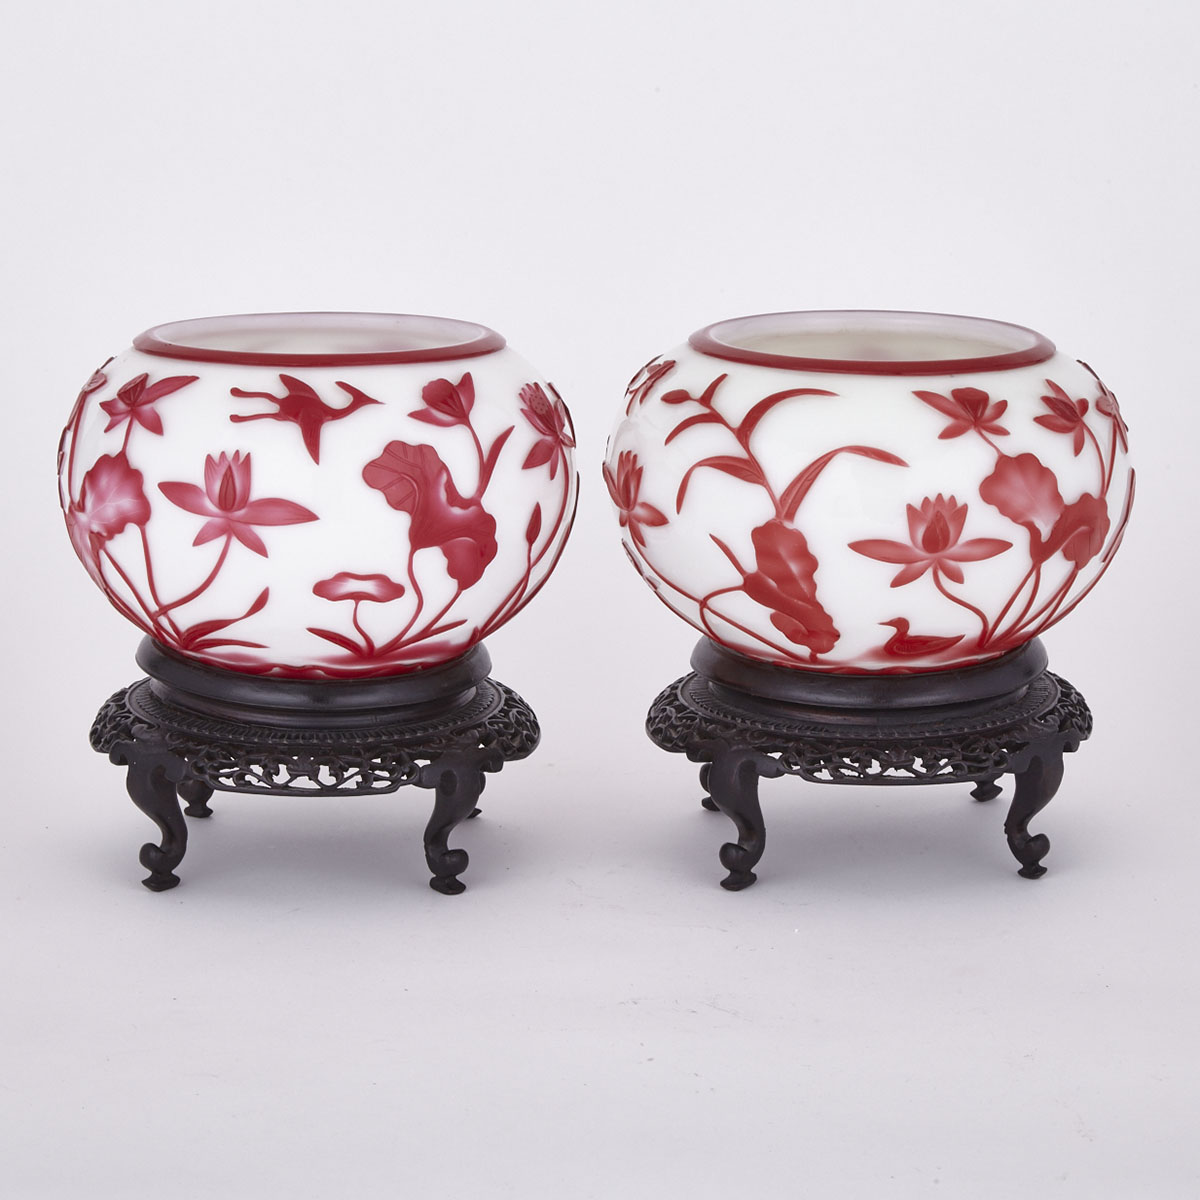 Pair of Red Overlay White Double Layer Peking Glass Bowls, Mid-20th Century or Earlier